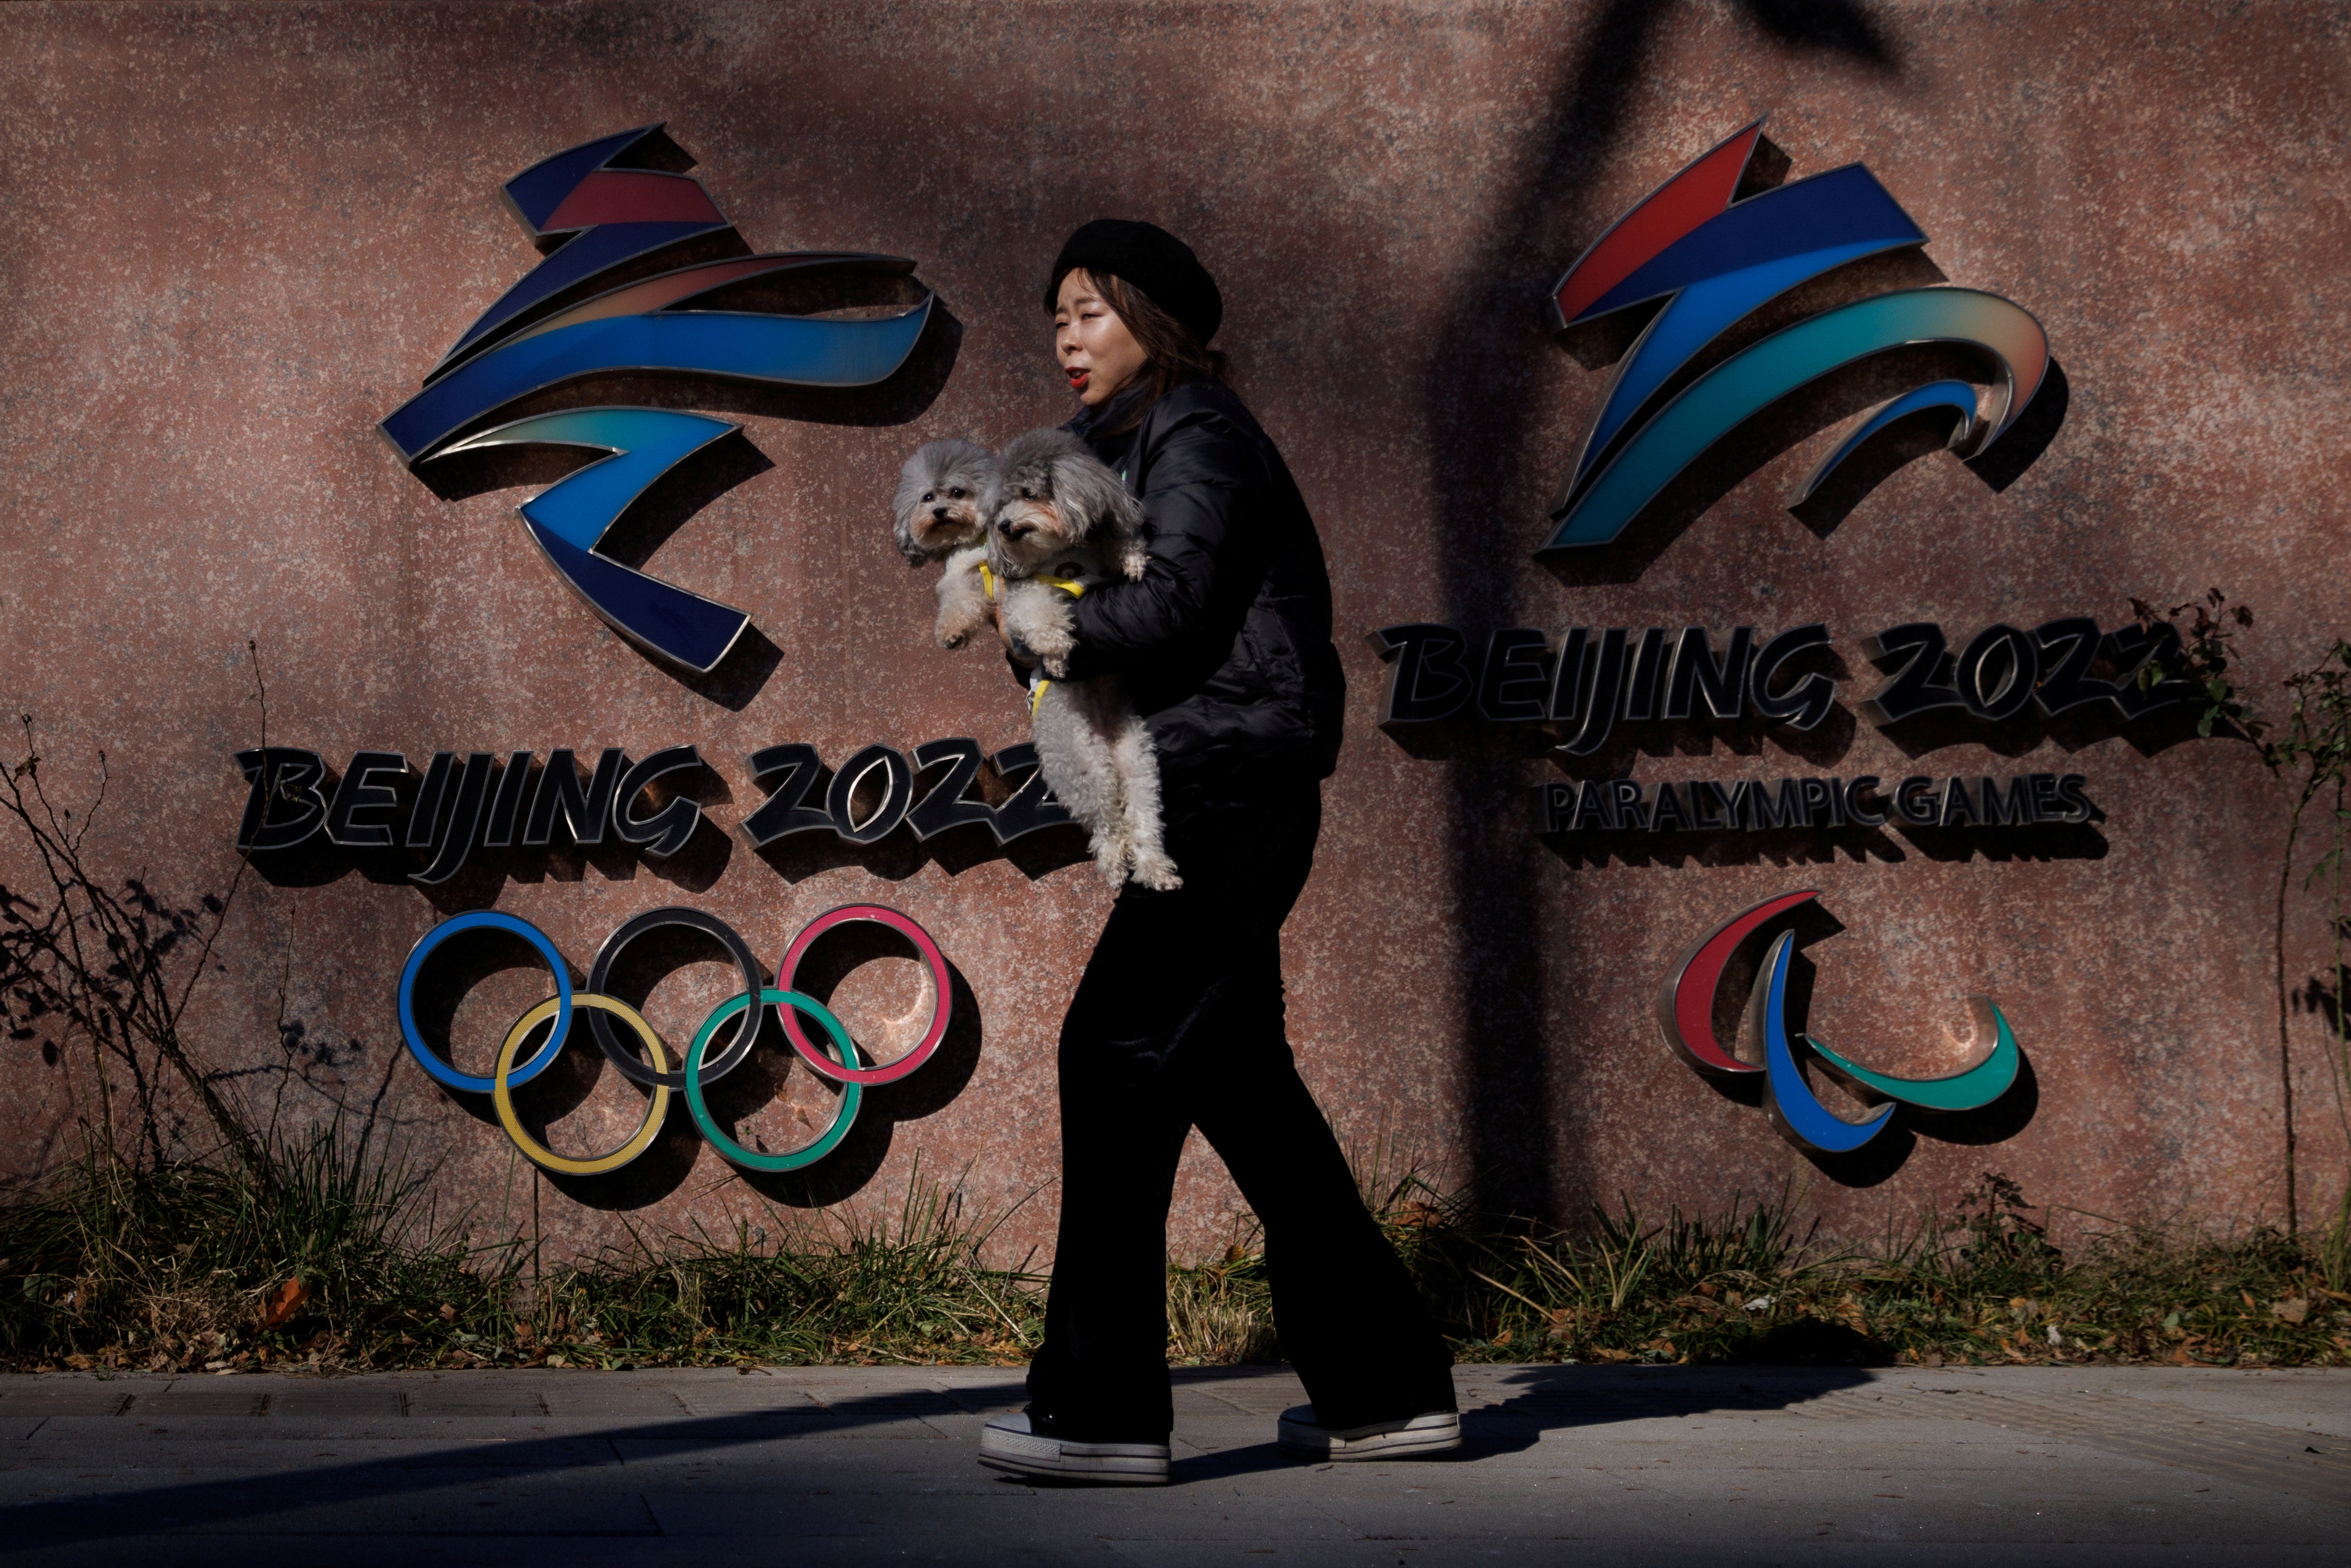 Beijing will host 2022 Olympic and Paralympic Winter Games